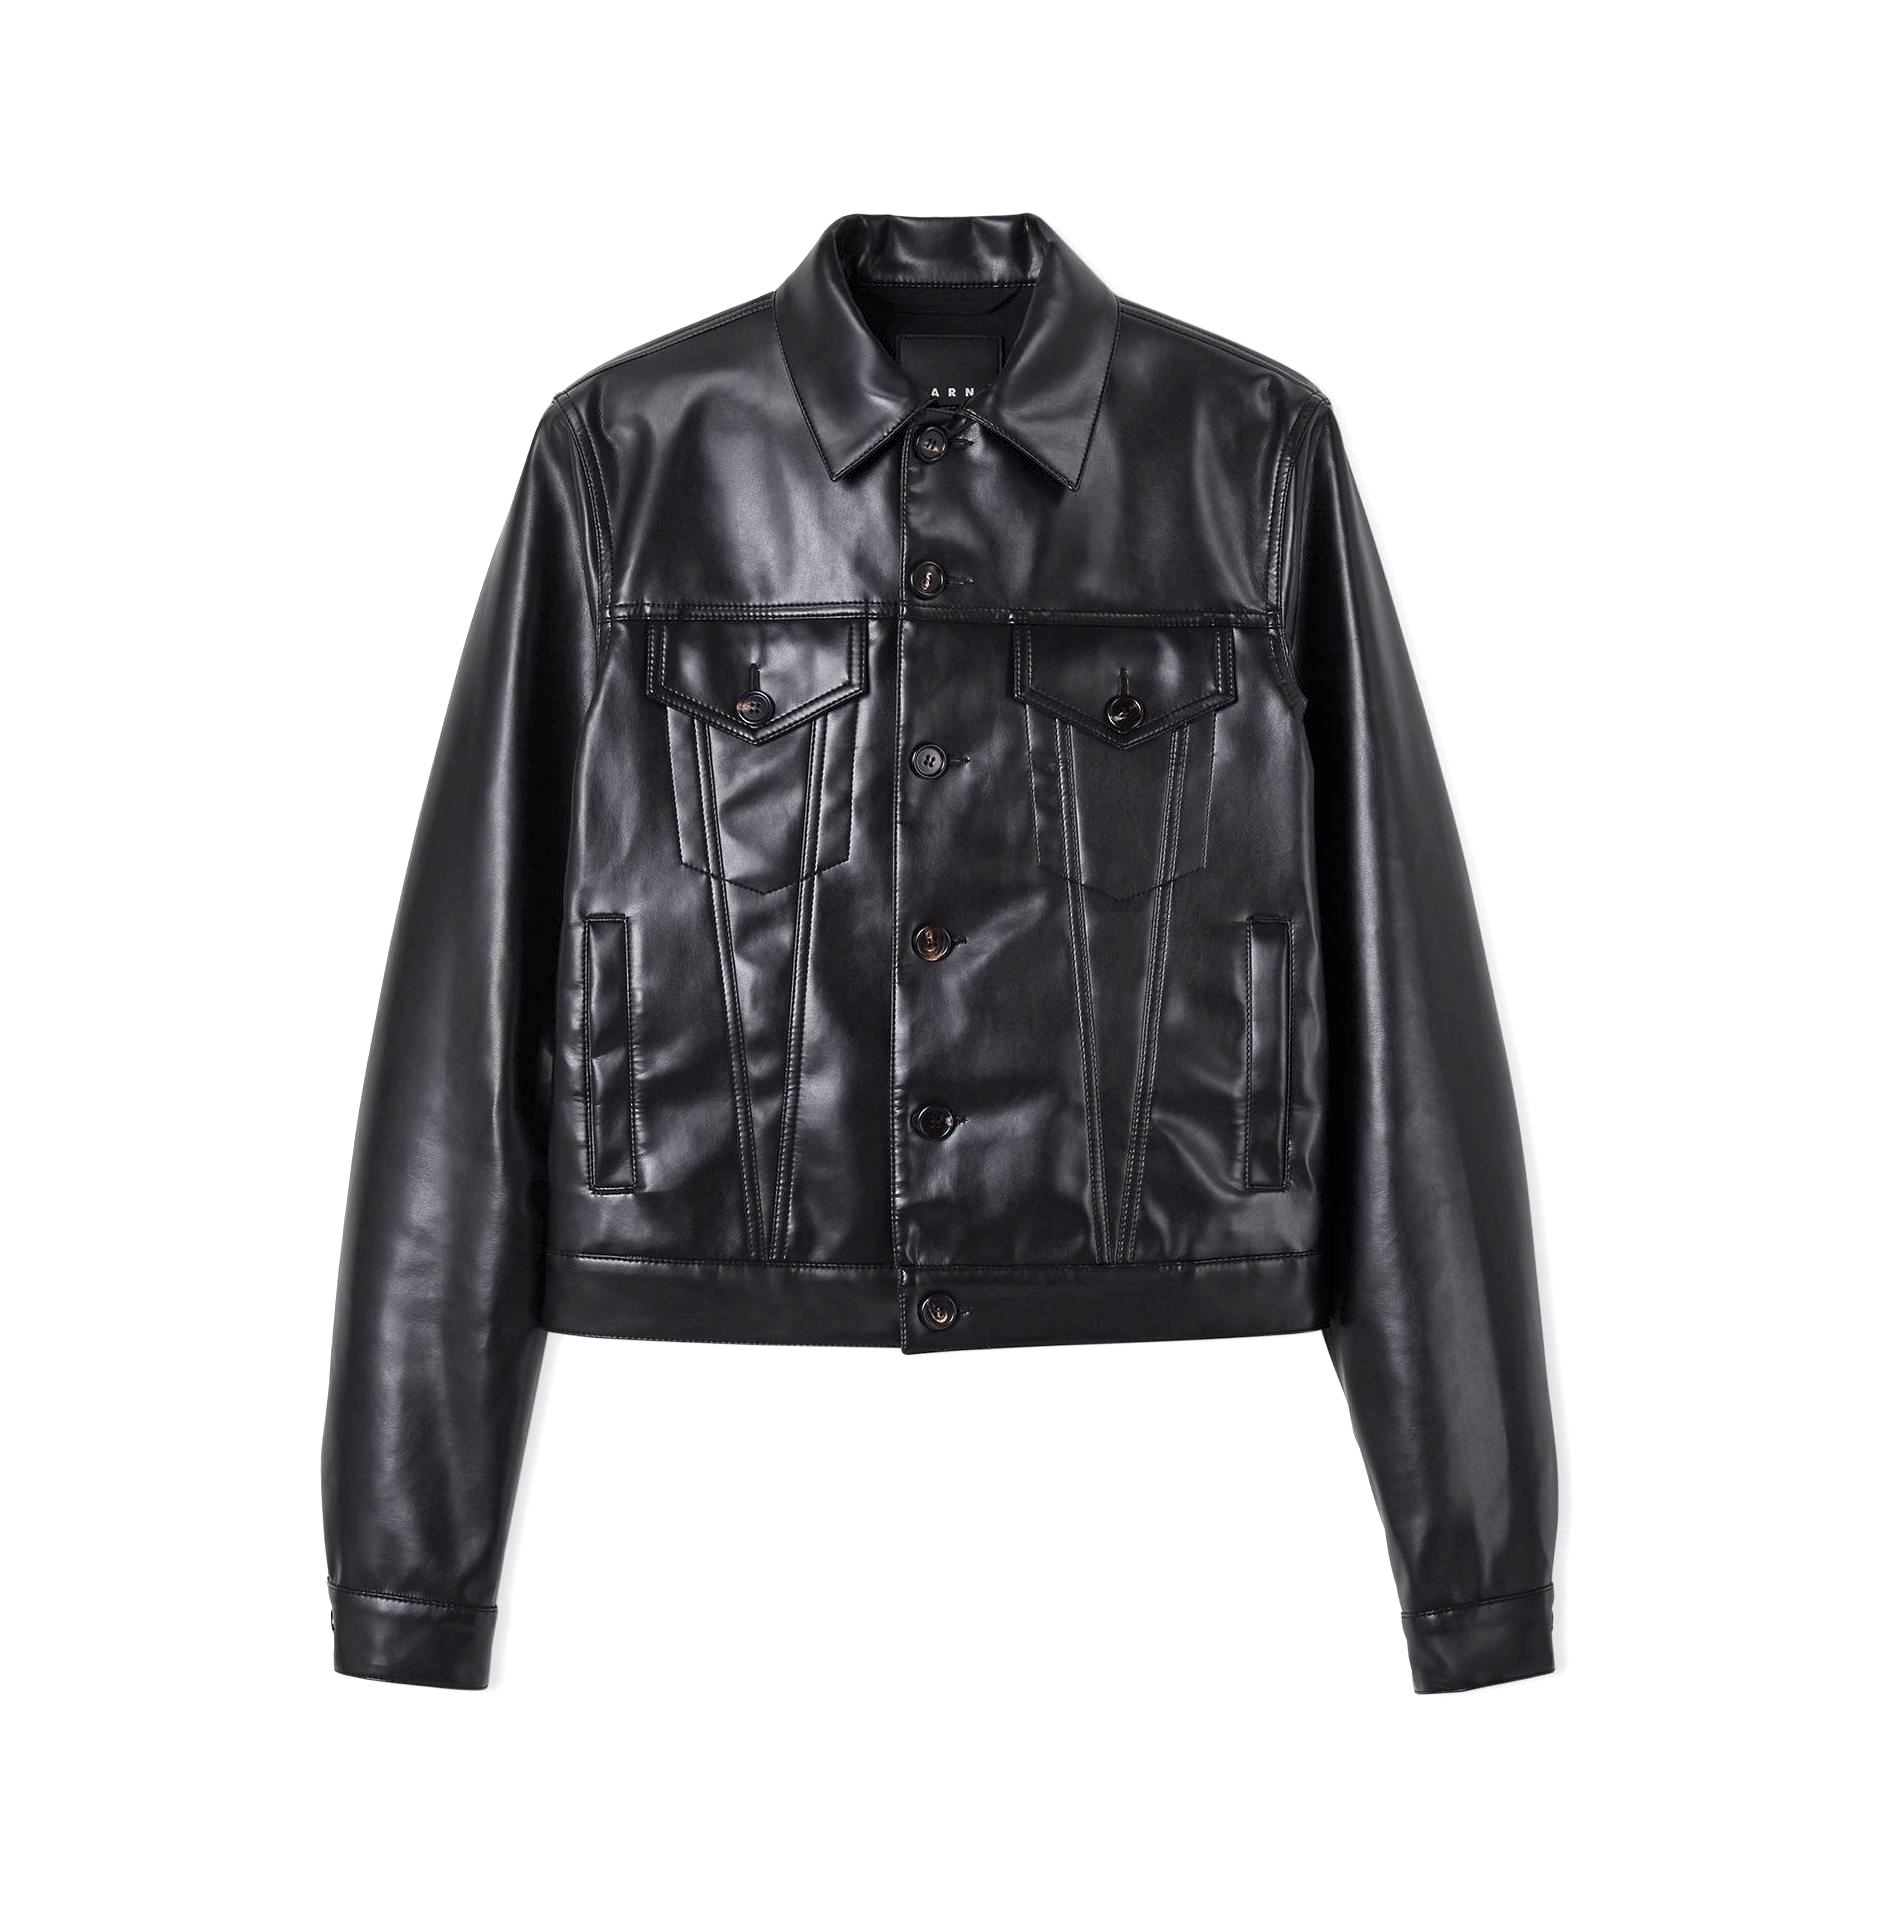 M A R N I RECYCLING COATING LEATHER JACKET